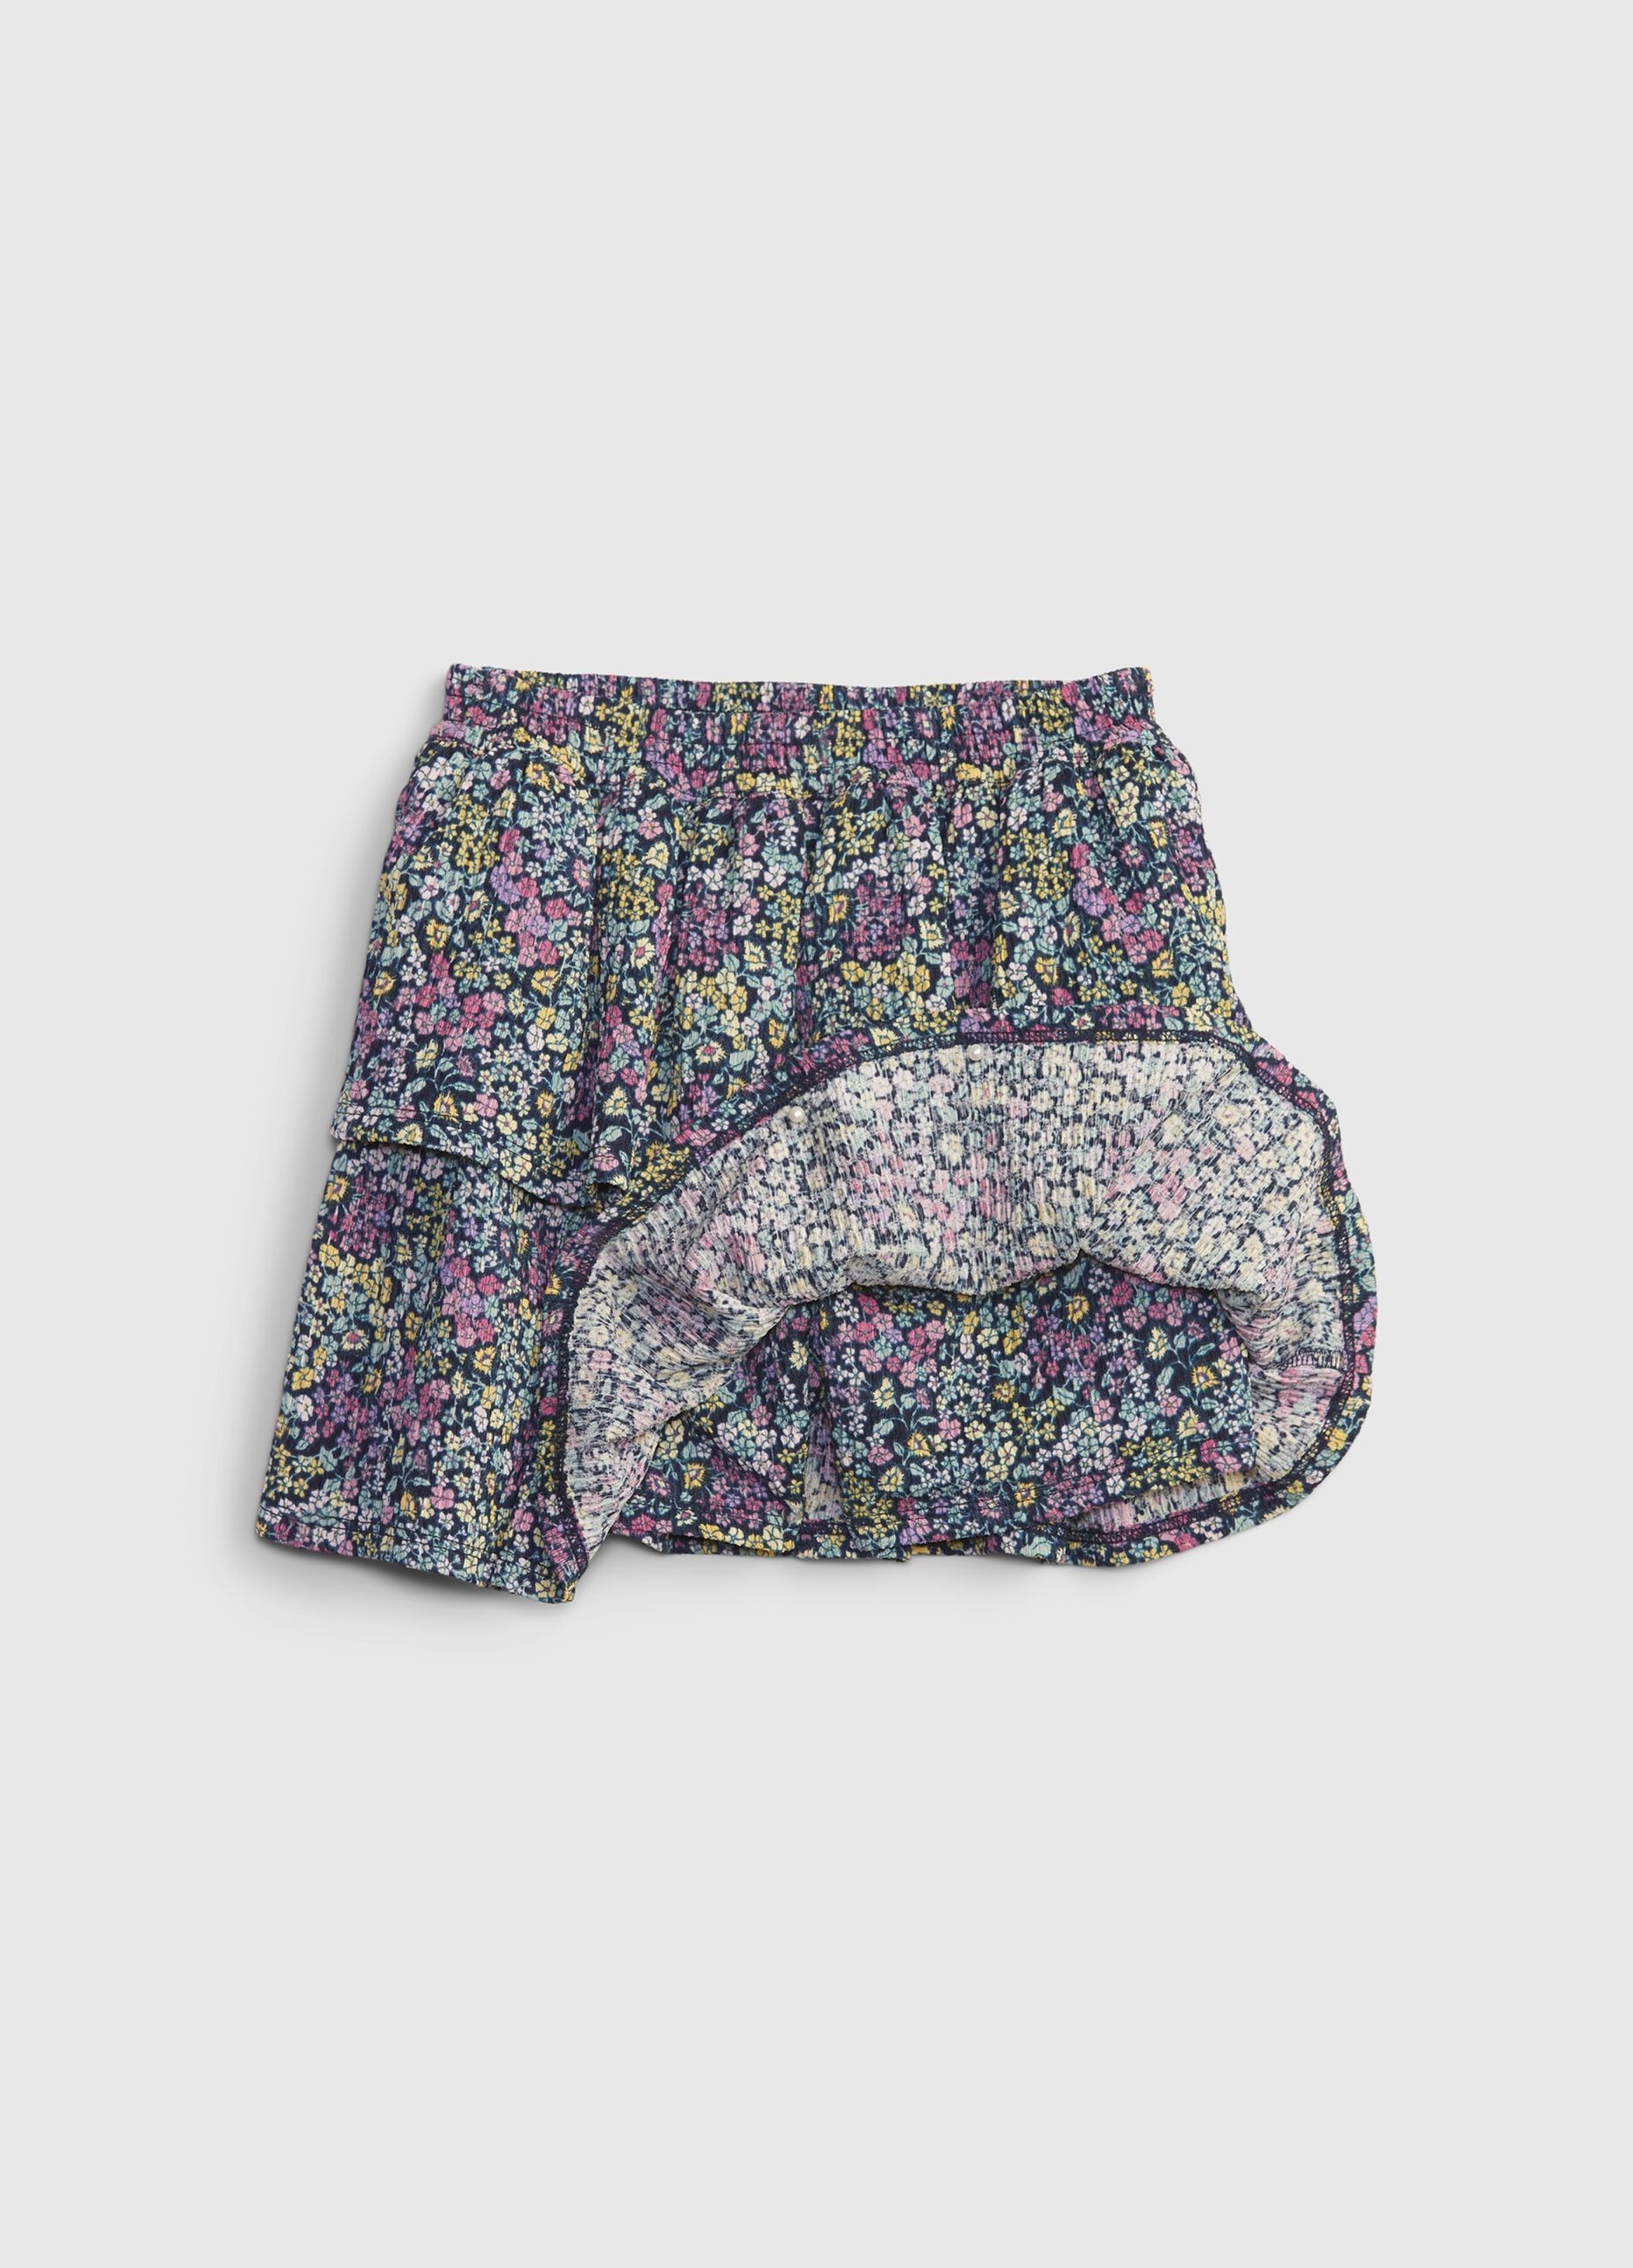 Tiered miniskirt with small flowers print